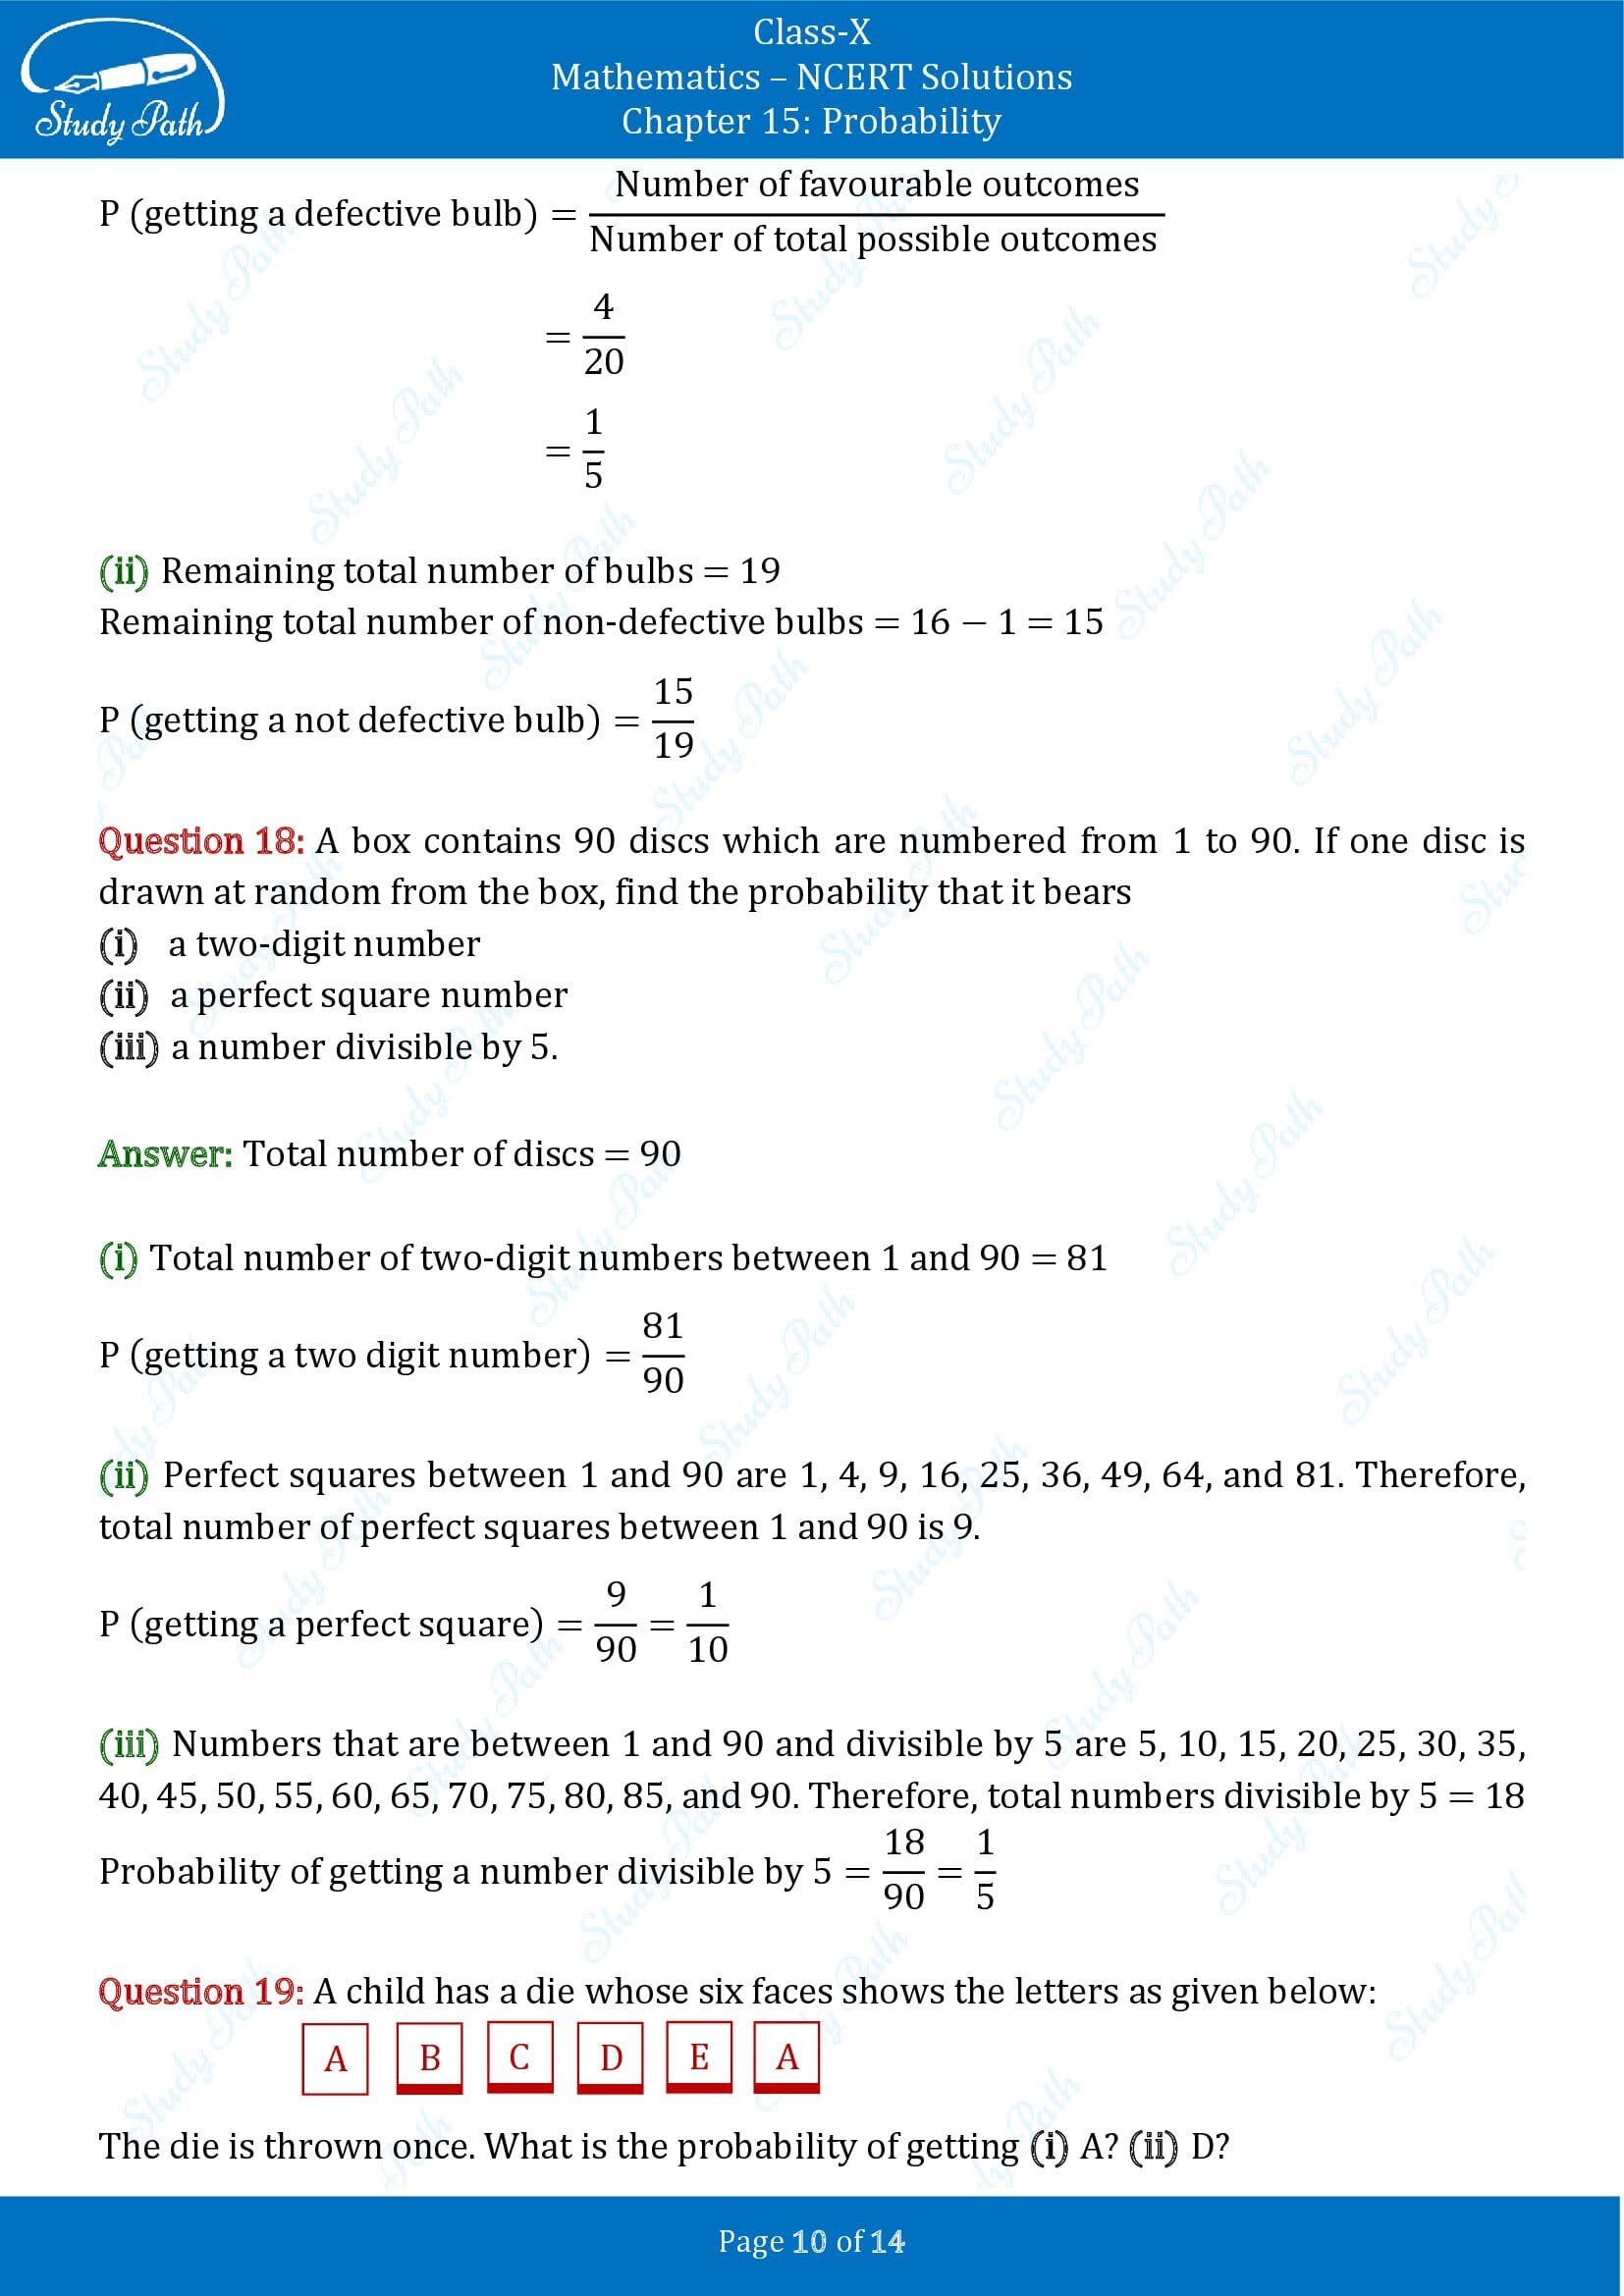 NCERT Solutions for Class 10 Maths Chapter 15 Probability Exercise 15.1 00010